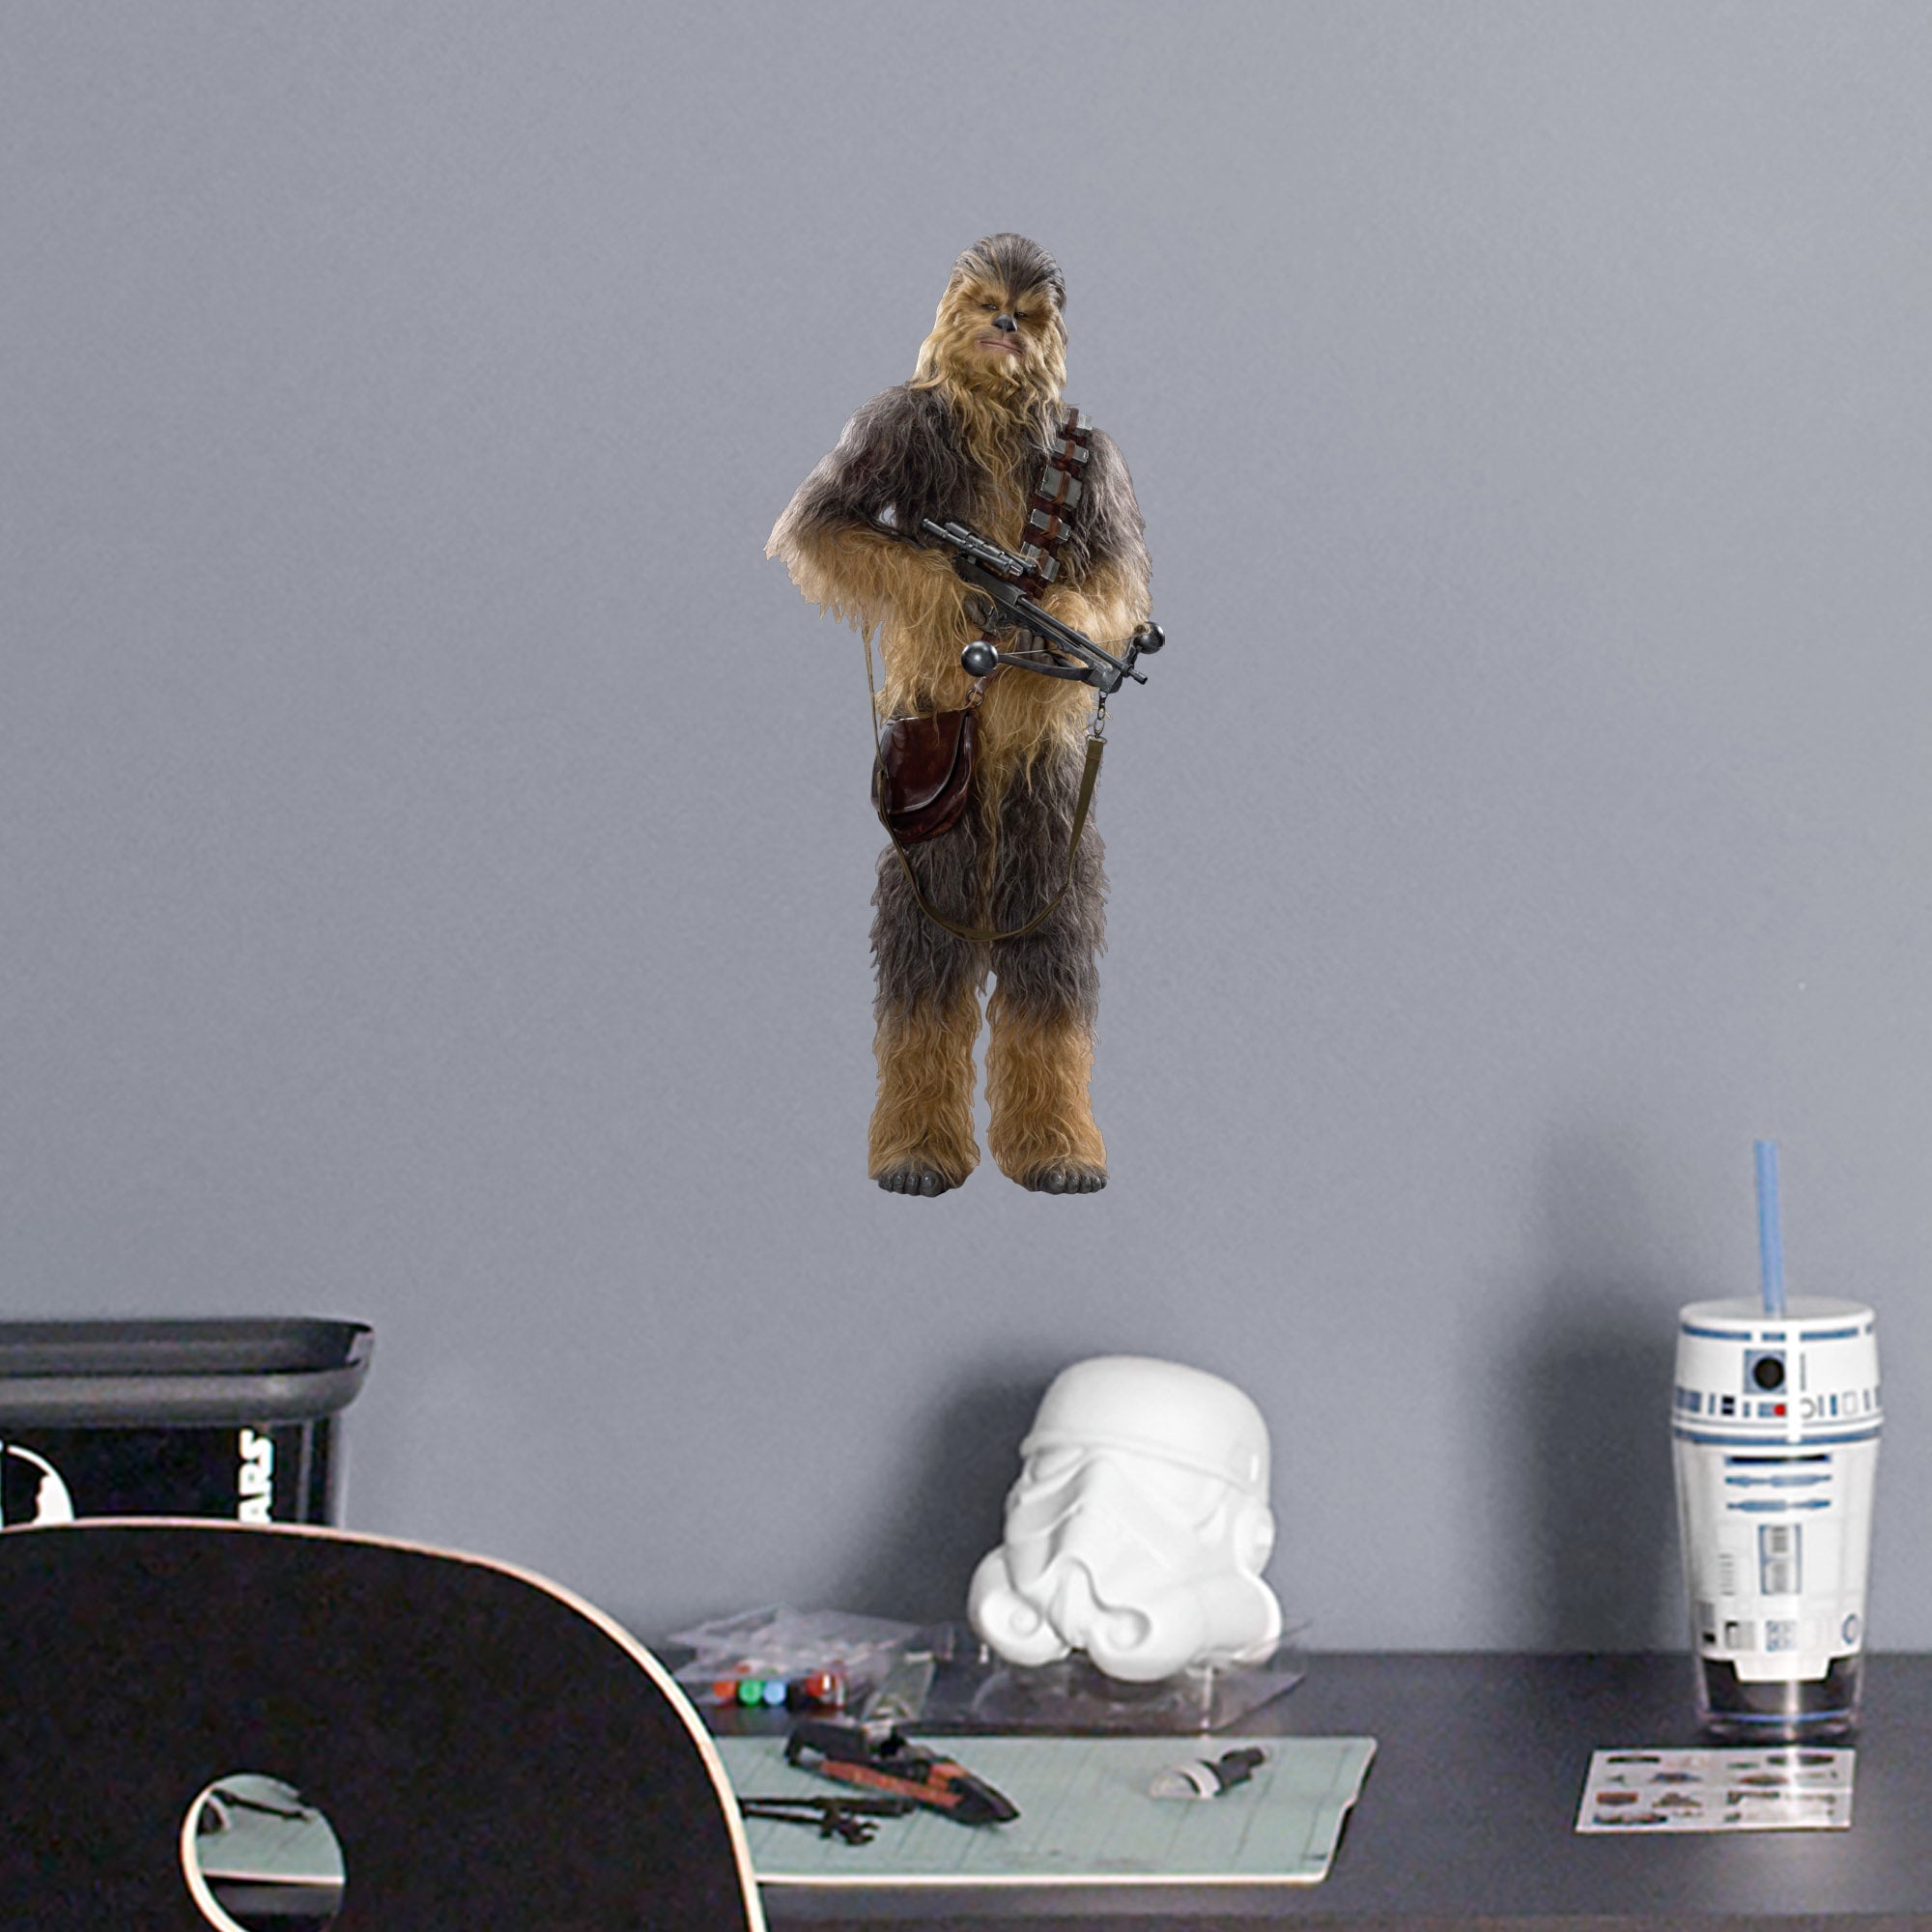 Chewbacca - Star Wars: The Force Awakens - Officially Licensed Removable Wall Decal Large by Fathead | Vinyl